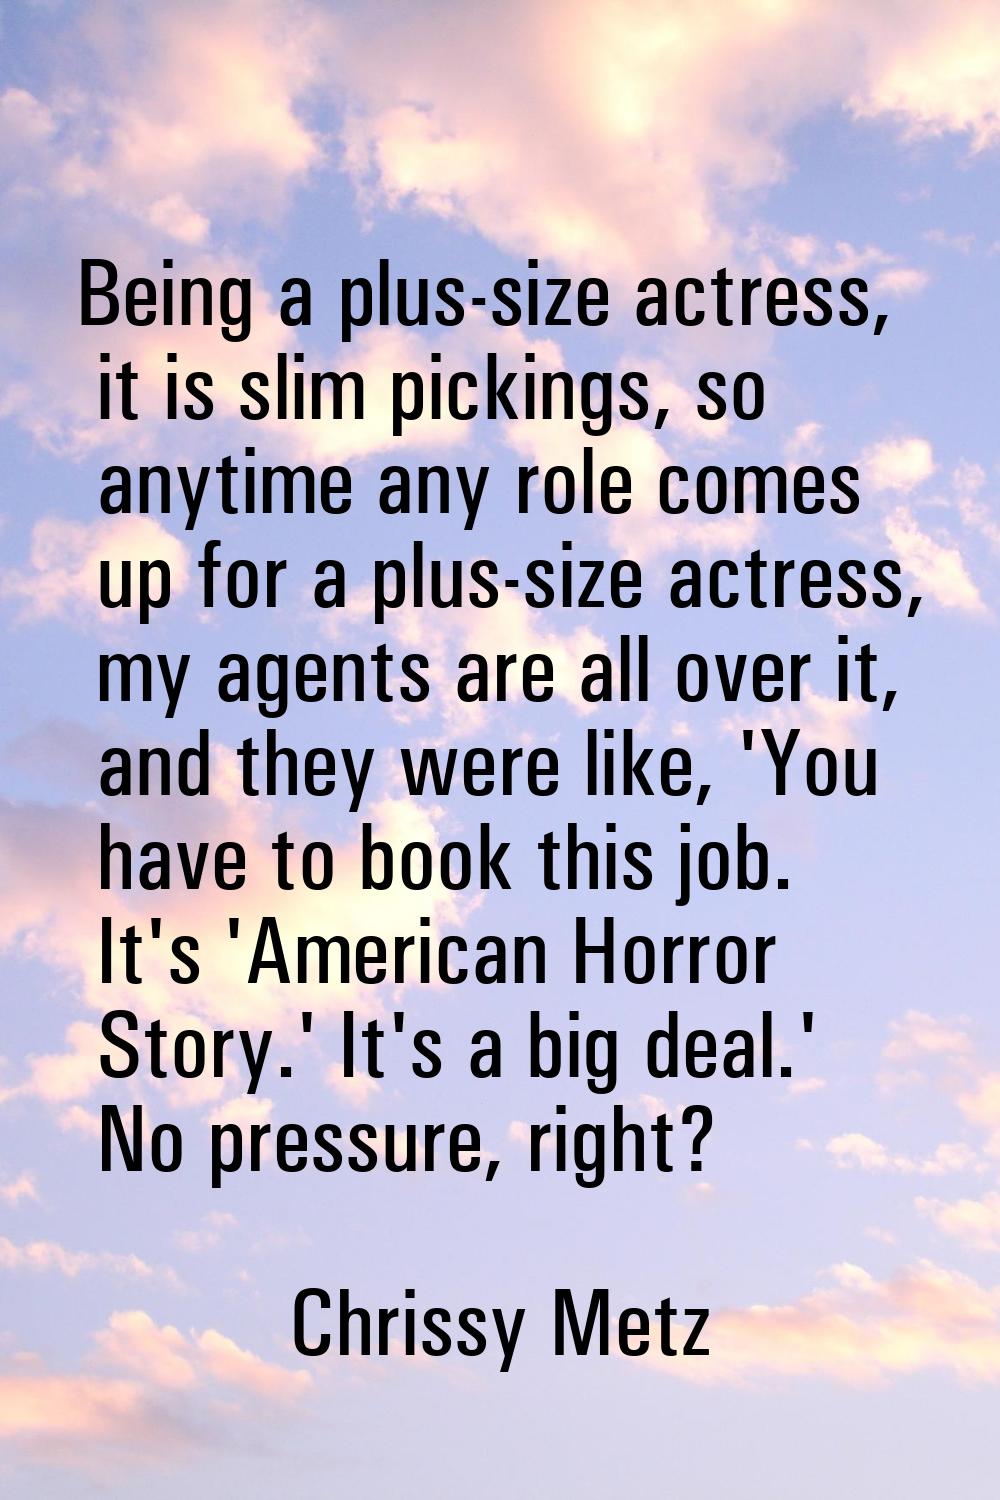 Being a plus-size actress, it is slim pickings, so anytime any role comes up for a plus-size actres